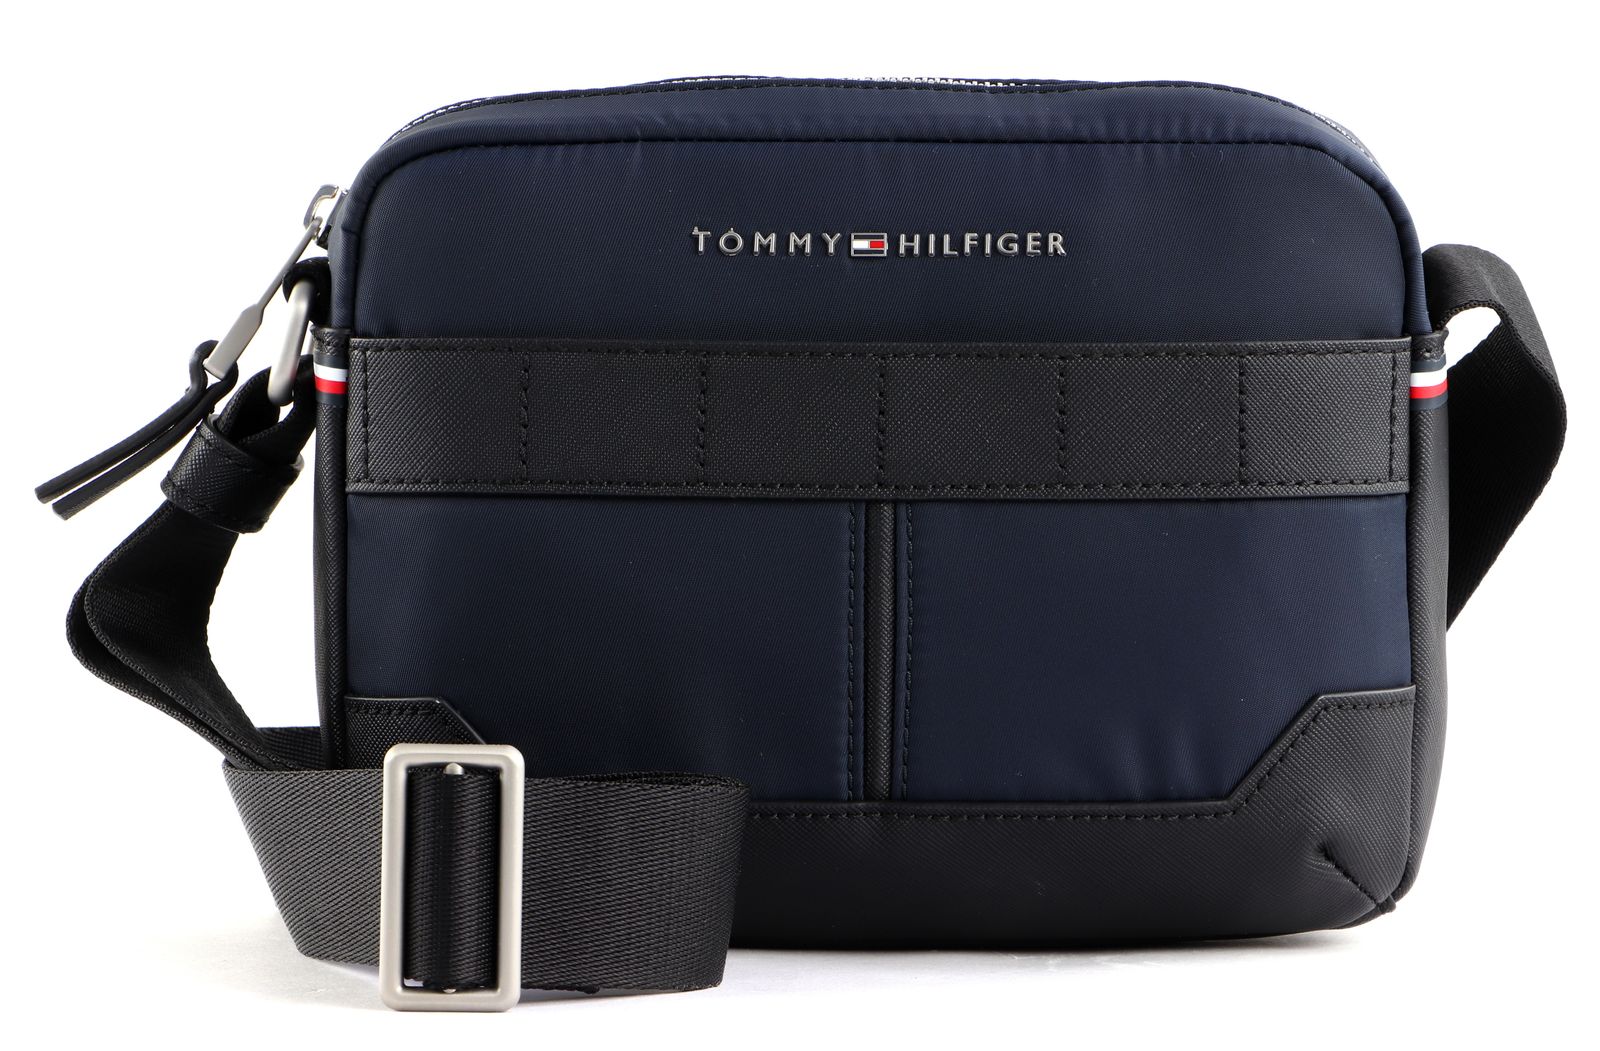 TOMMY HILFIGER Elevated Nylon Camera Bag Space Blue | Buy bags, purses ...